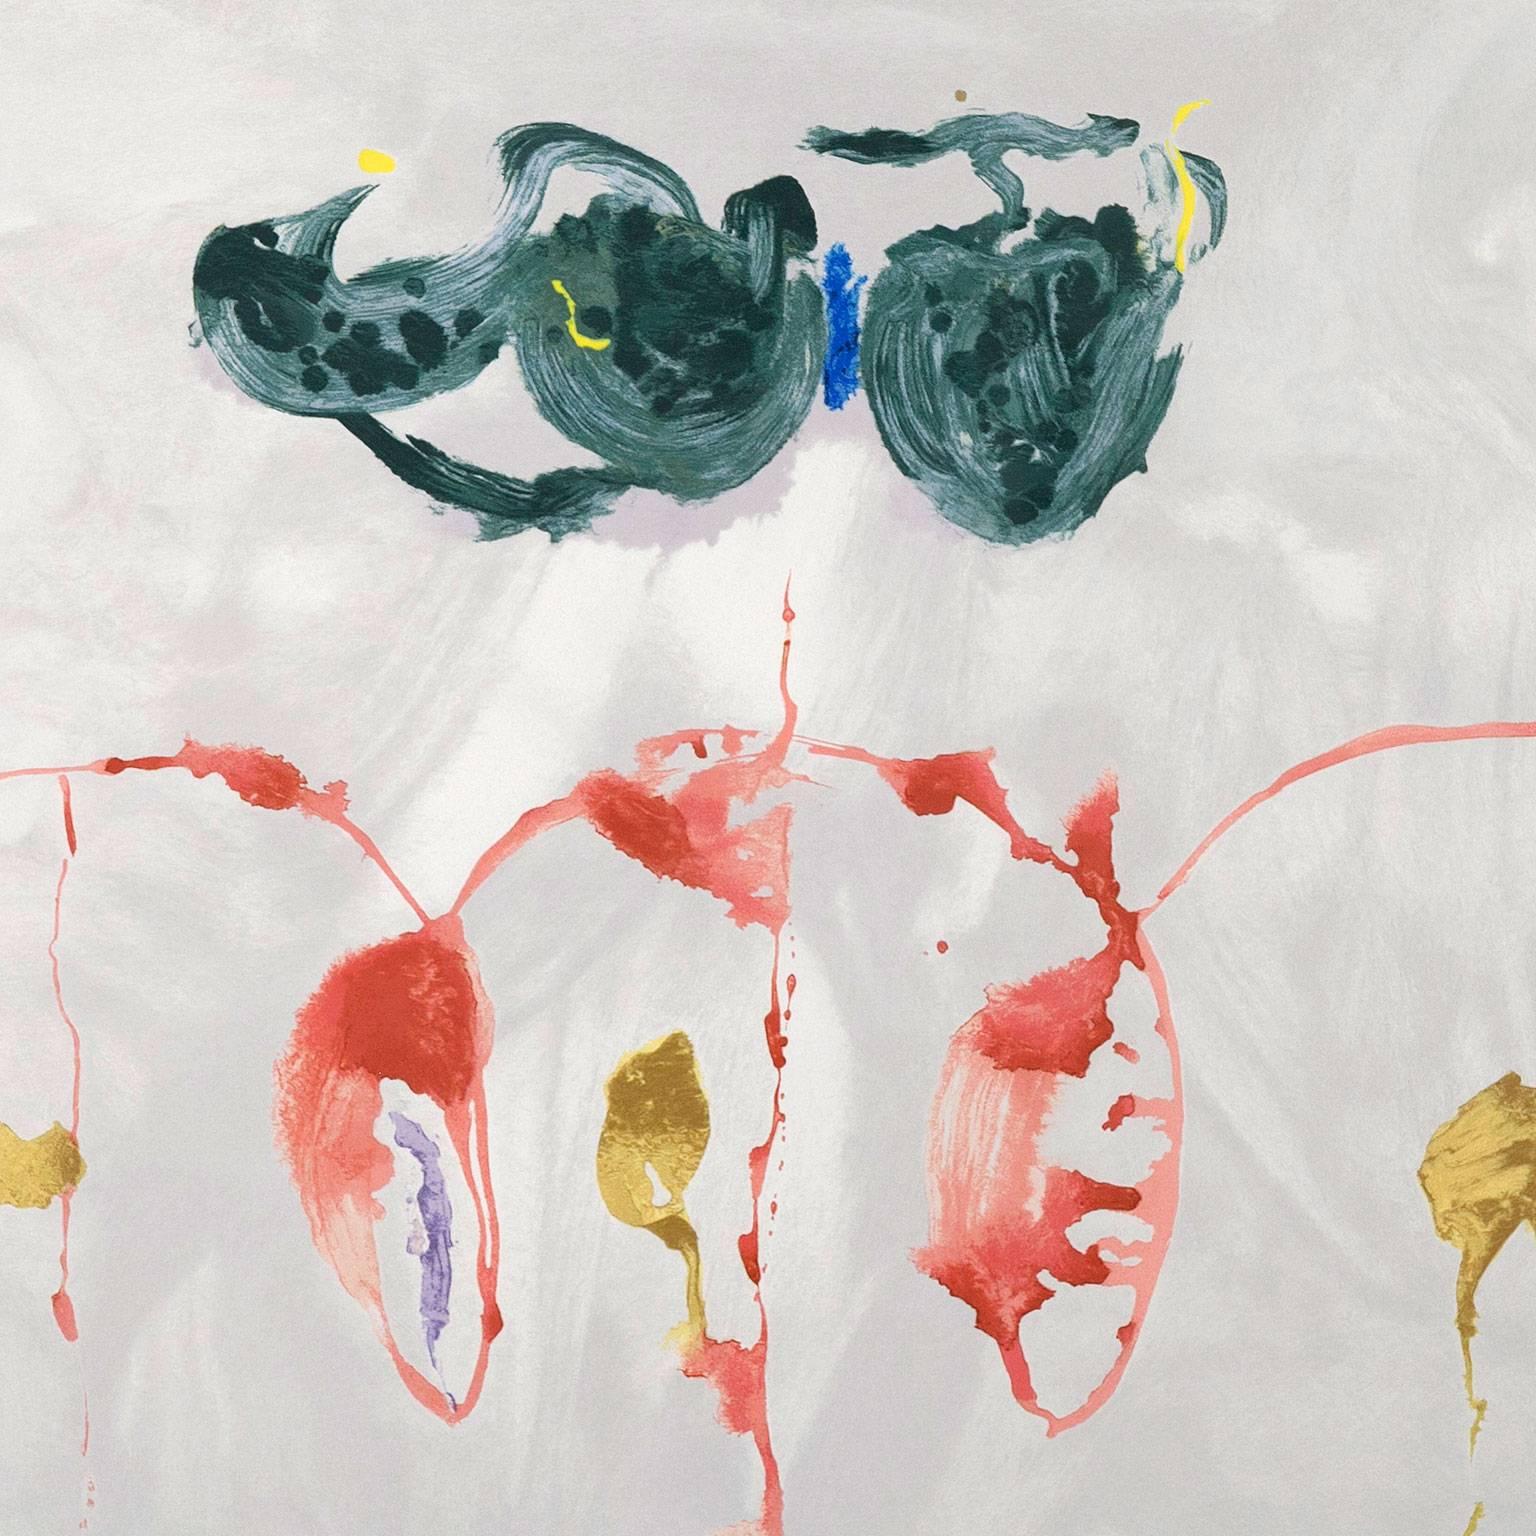 One of the most remarkable characteristics of Helen Frankenthaler's lengthy and impressive career is how during each decade the artist experiments and evolves. 

This later work is one of her finest prints and encapsulates many of the best aesthetic